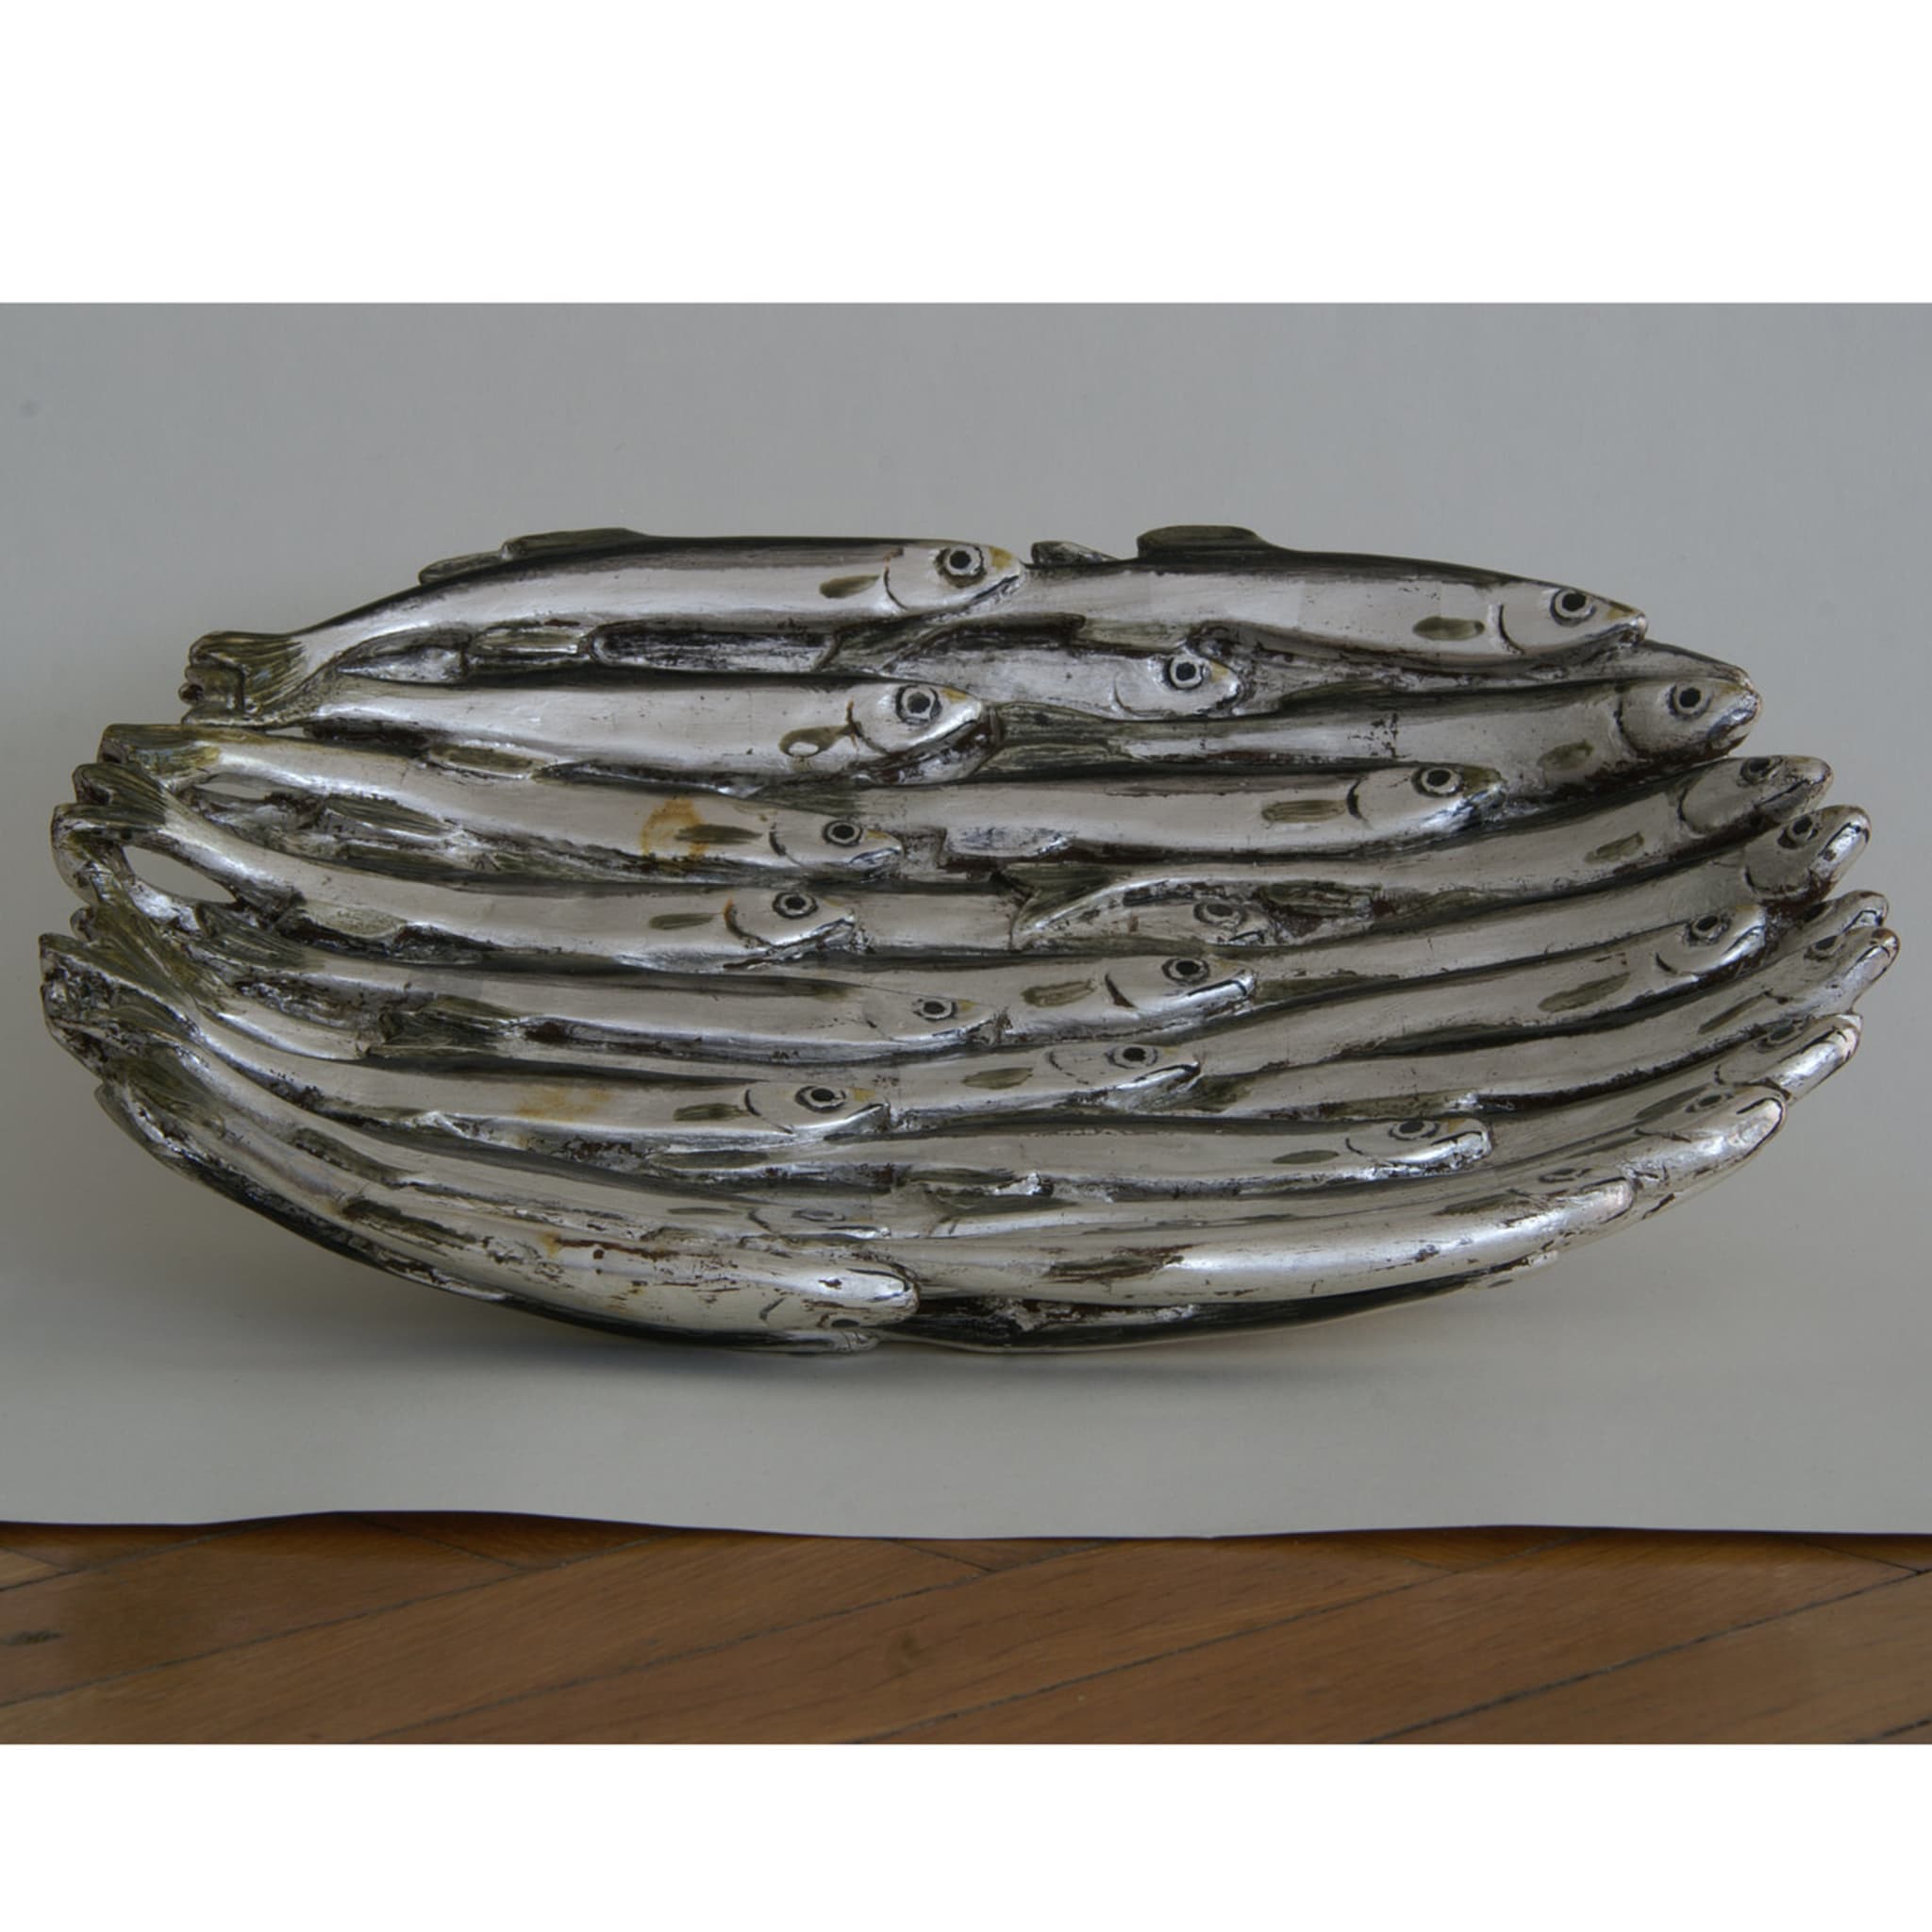 Sculptural Anchovy Tray - Alternative view 1